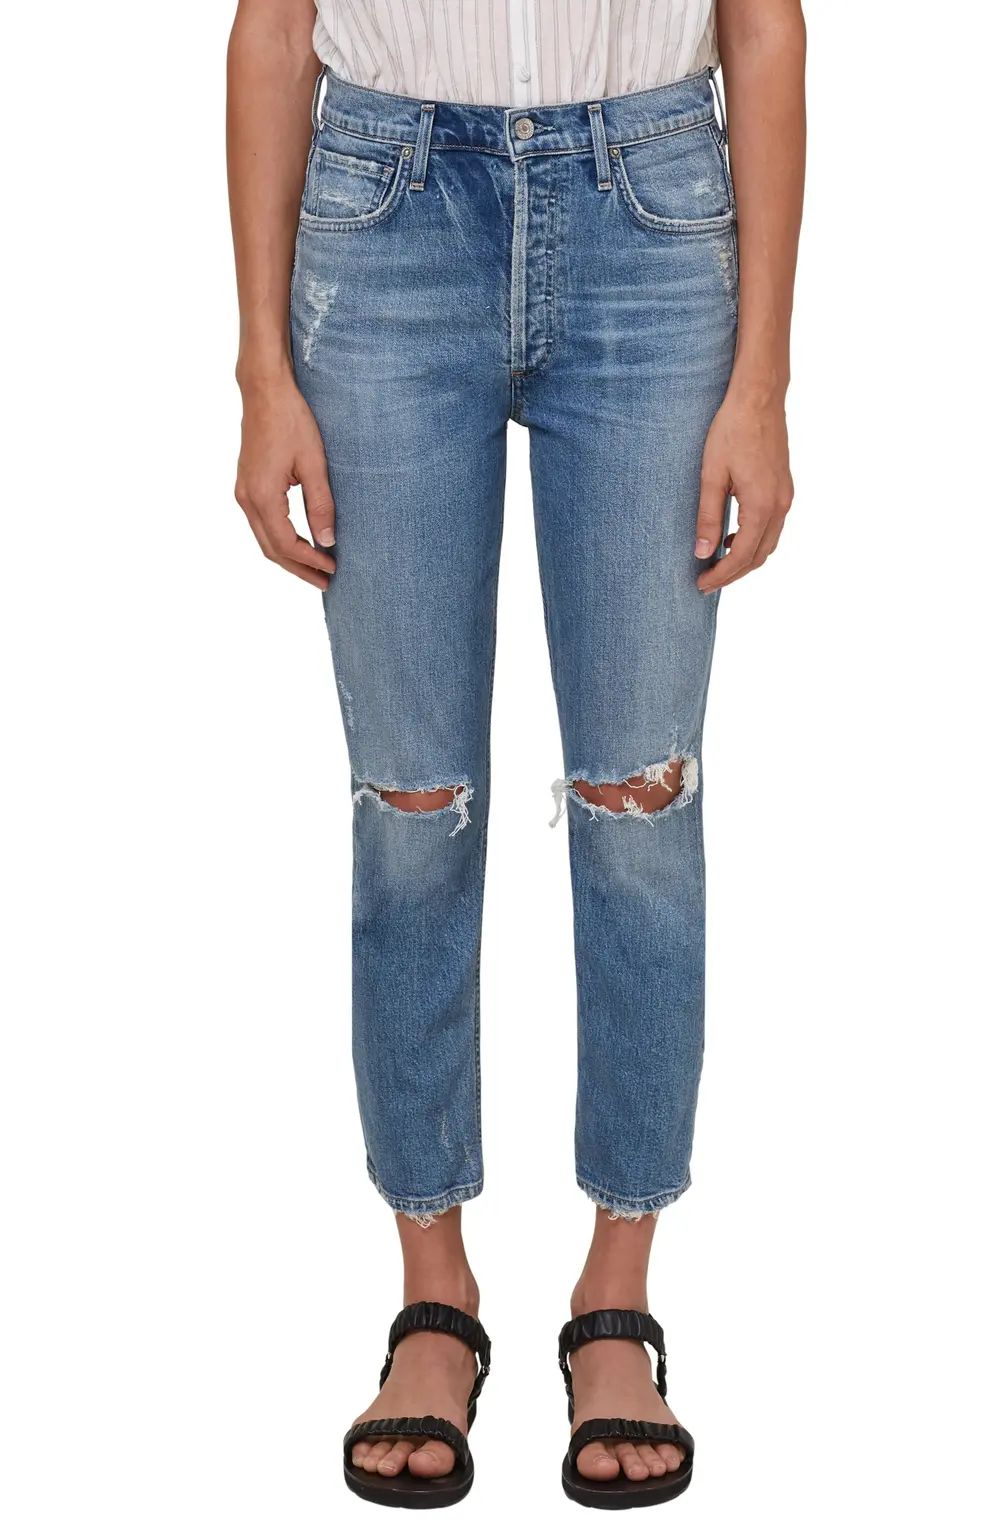 Citizens of Humanity Ripped High Waist Crop Straight Leg Jeans, Size 24 in Morning Light at Nordstro | Nordstrom Canada